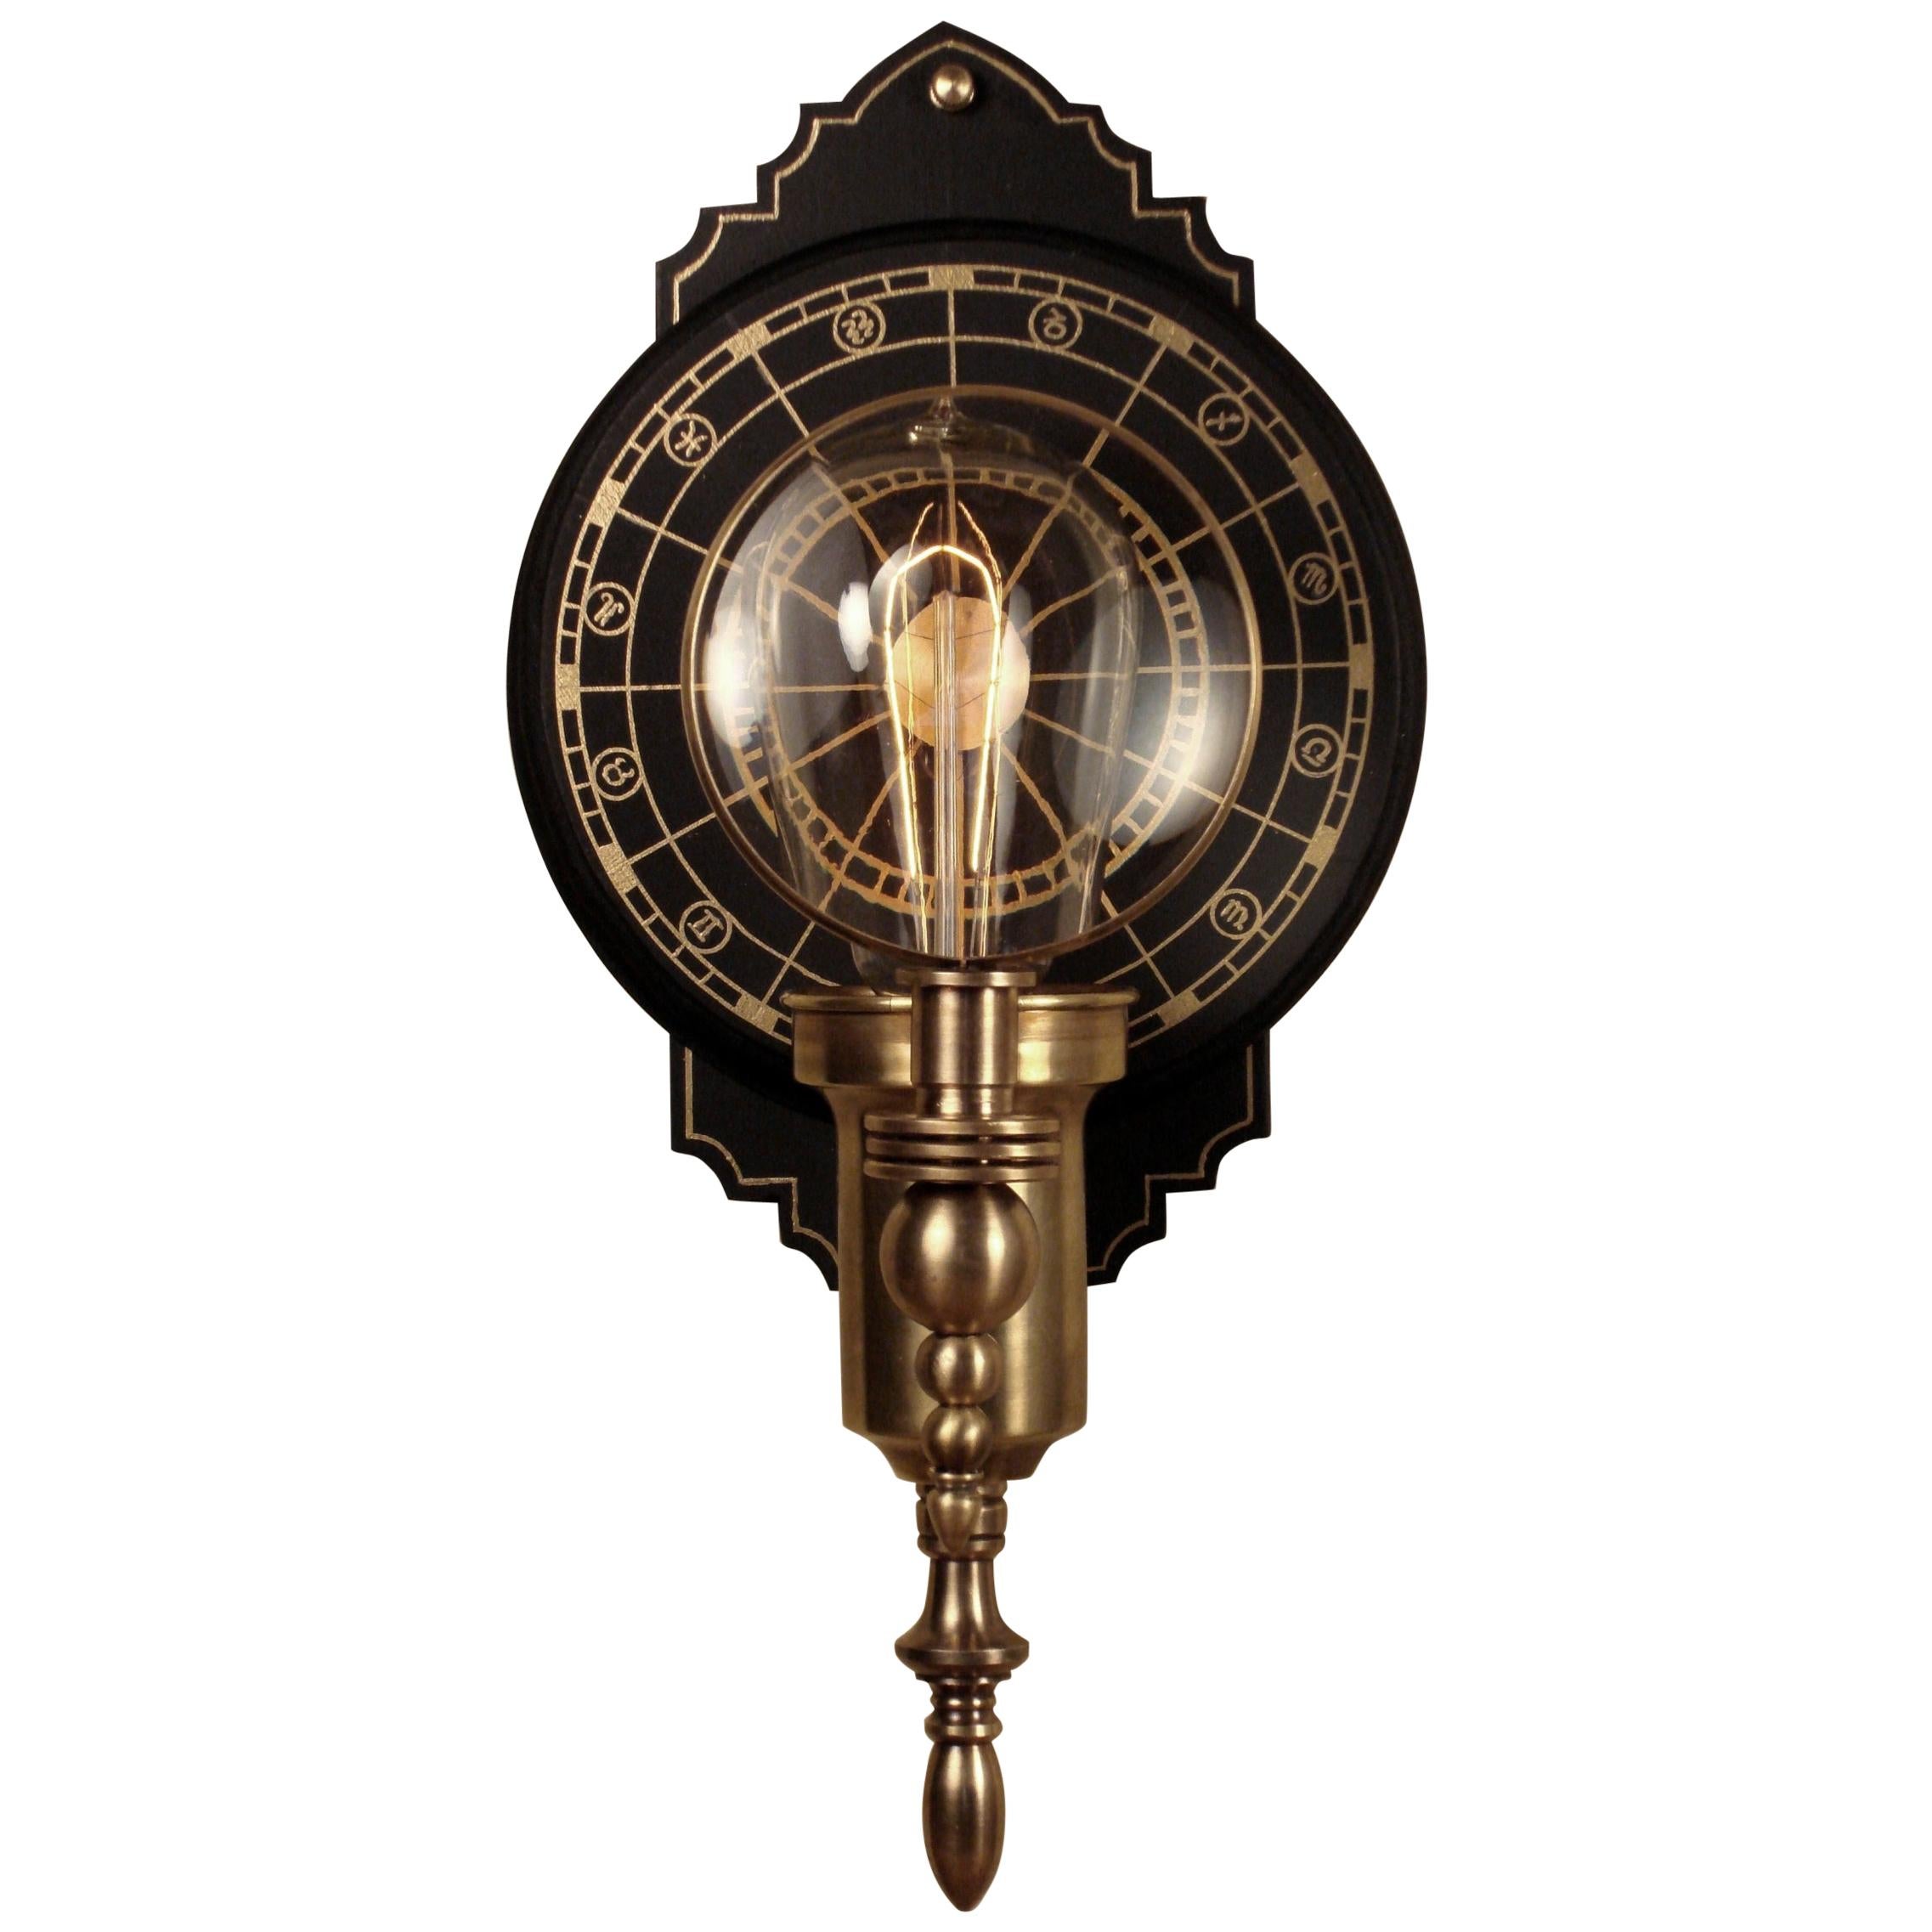 Art Donovan / Steampunk Wall Lamp, "Parrish Carriage" For Sale